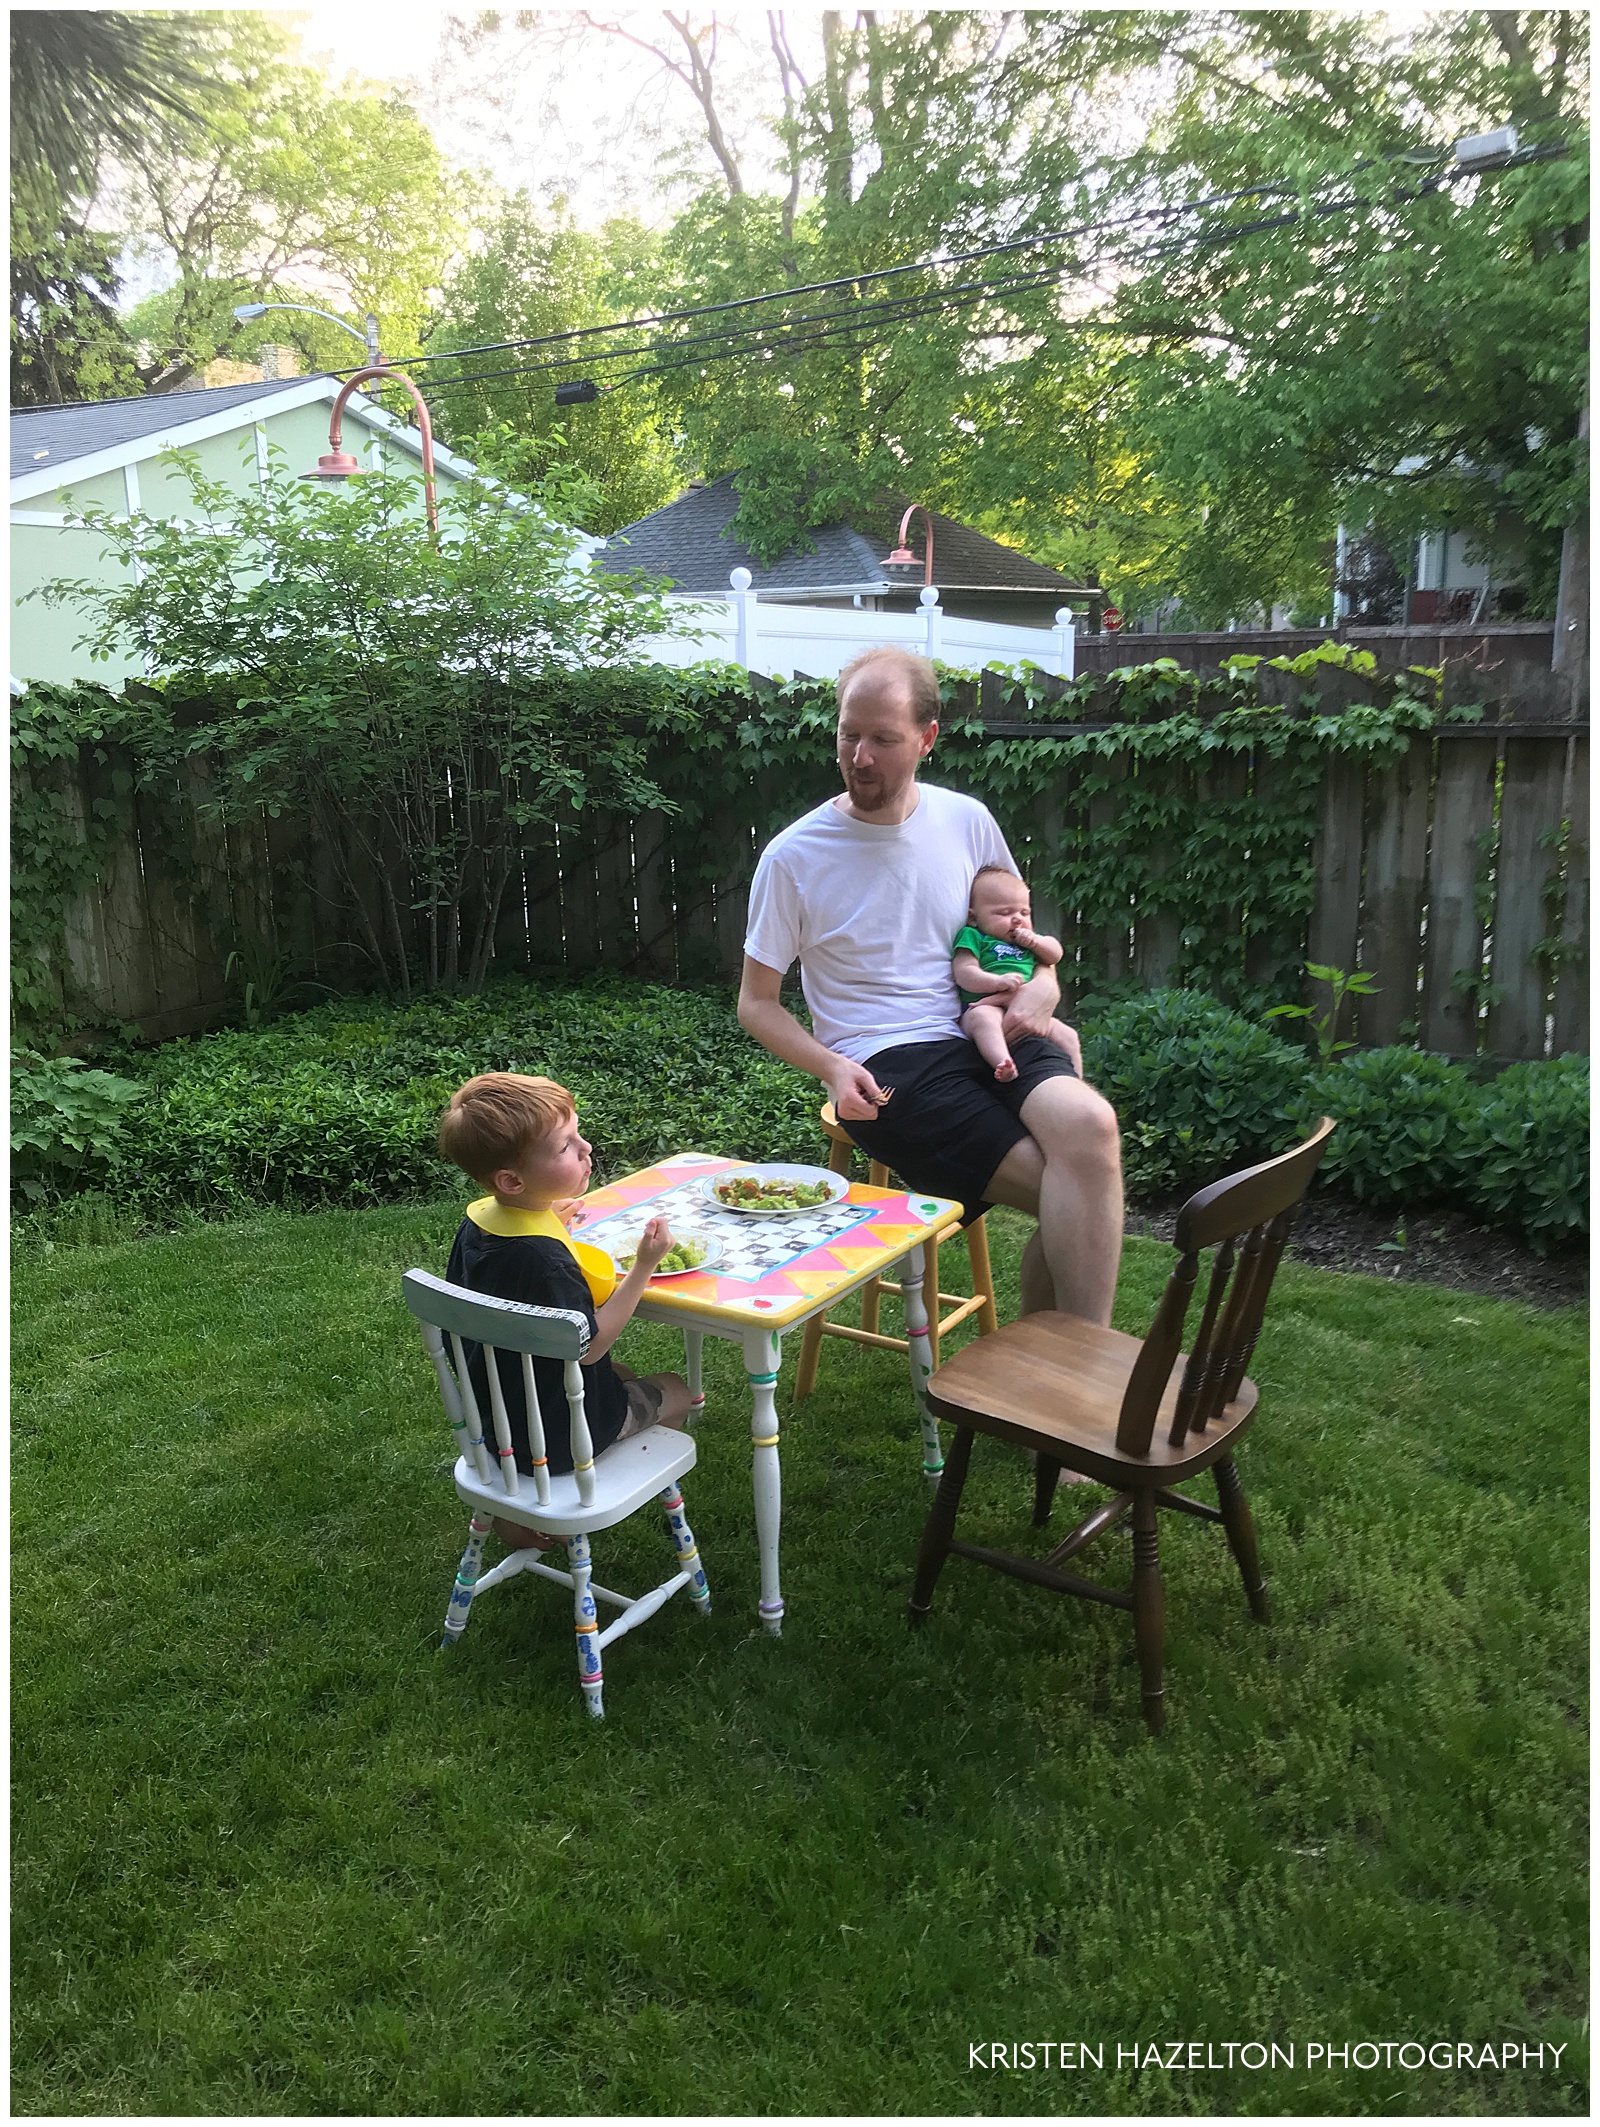 Family dining outdoors on a very small table